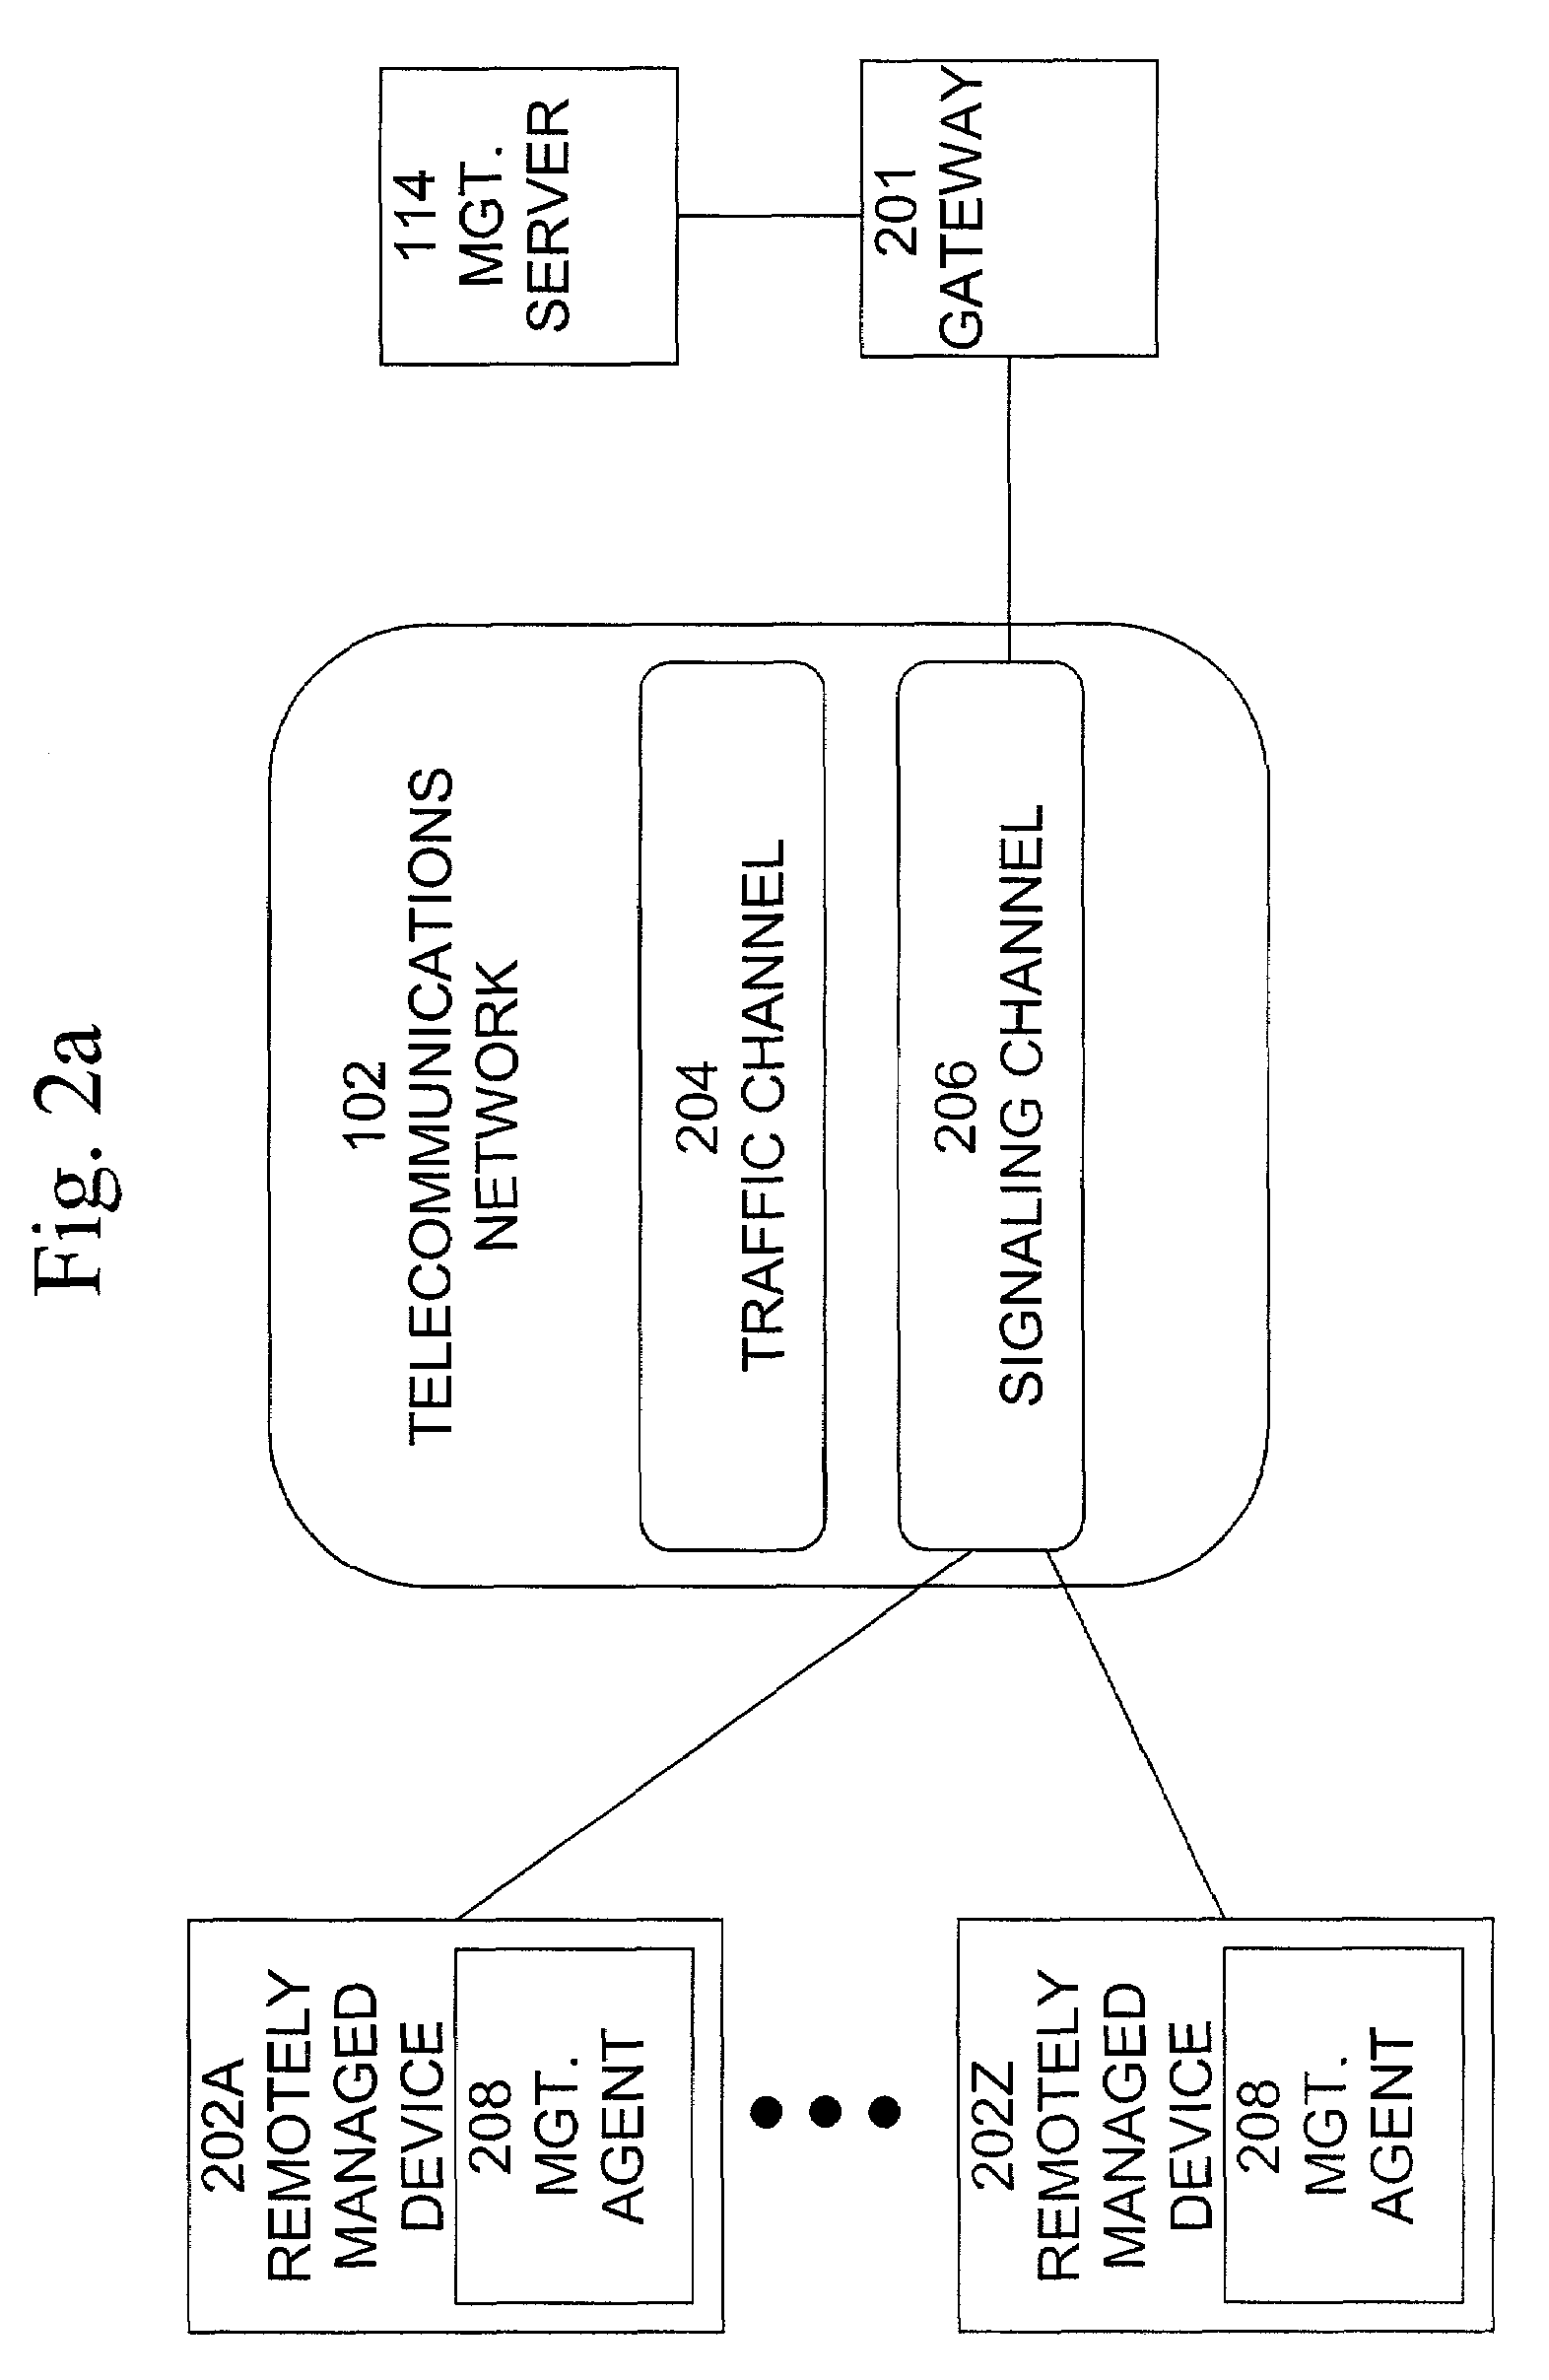 System and method for wireless data terminal management using telecommunication signaling network